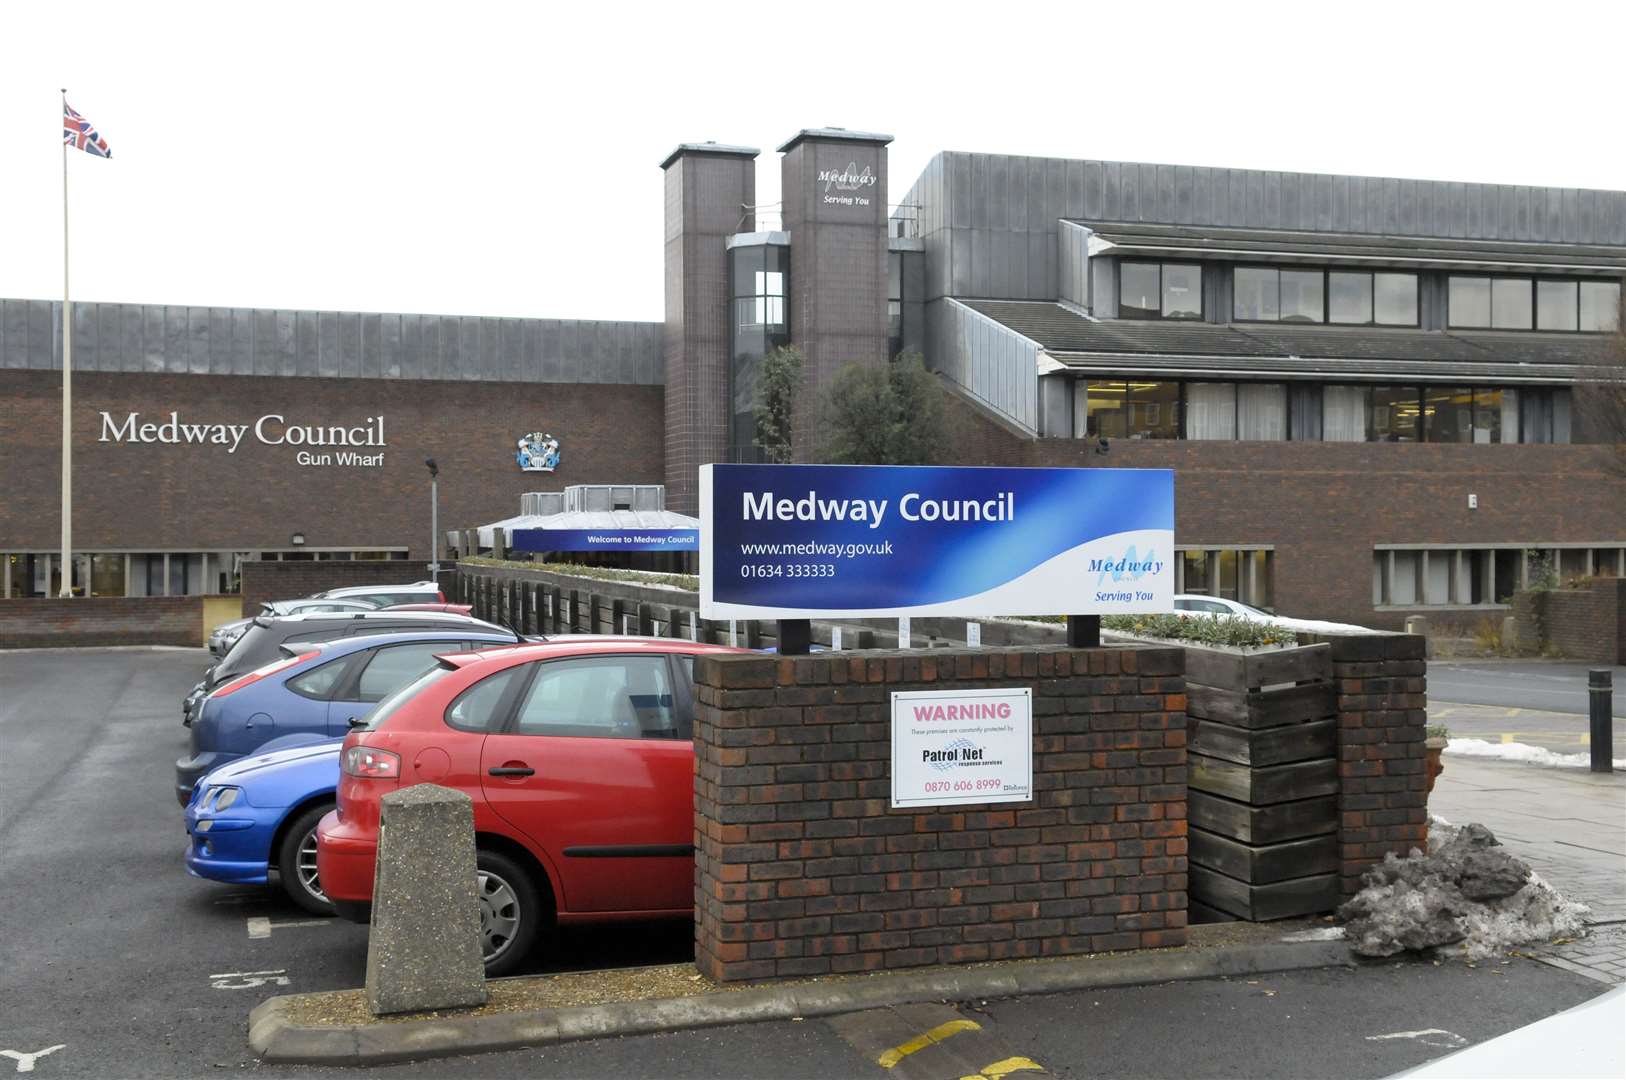 Medway Council's children's services department was put under a government-appointed inspector after serious concerns were raised in 2019